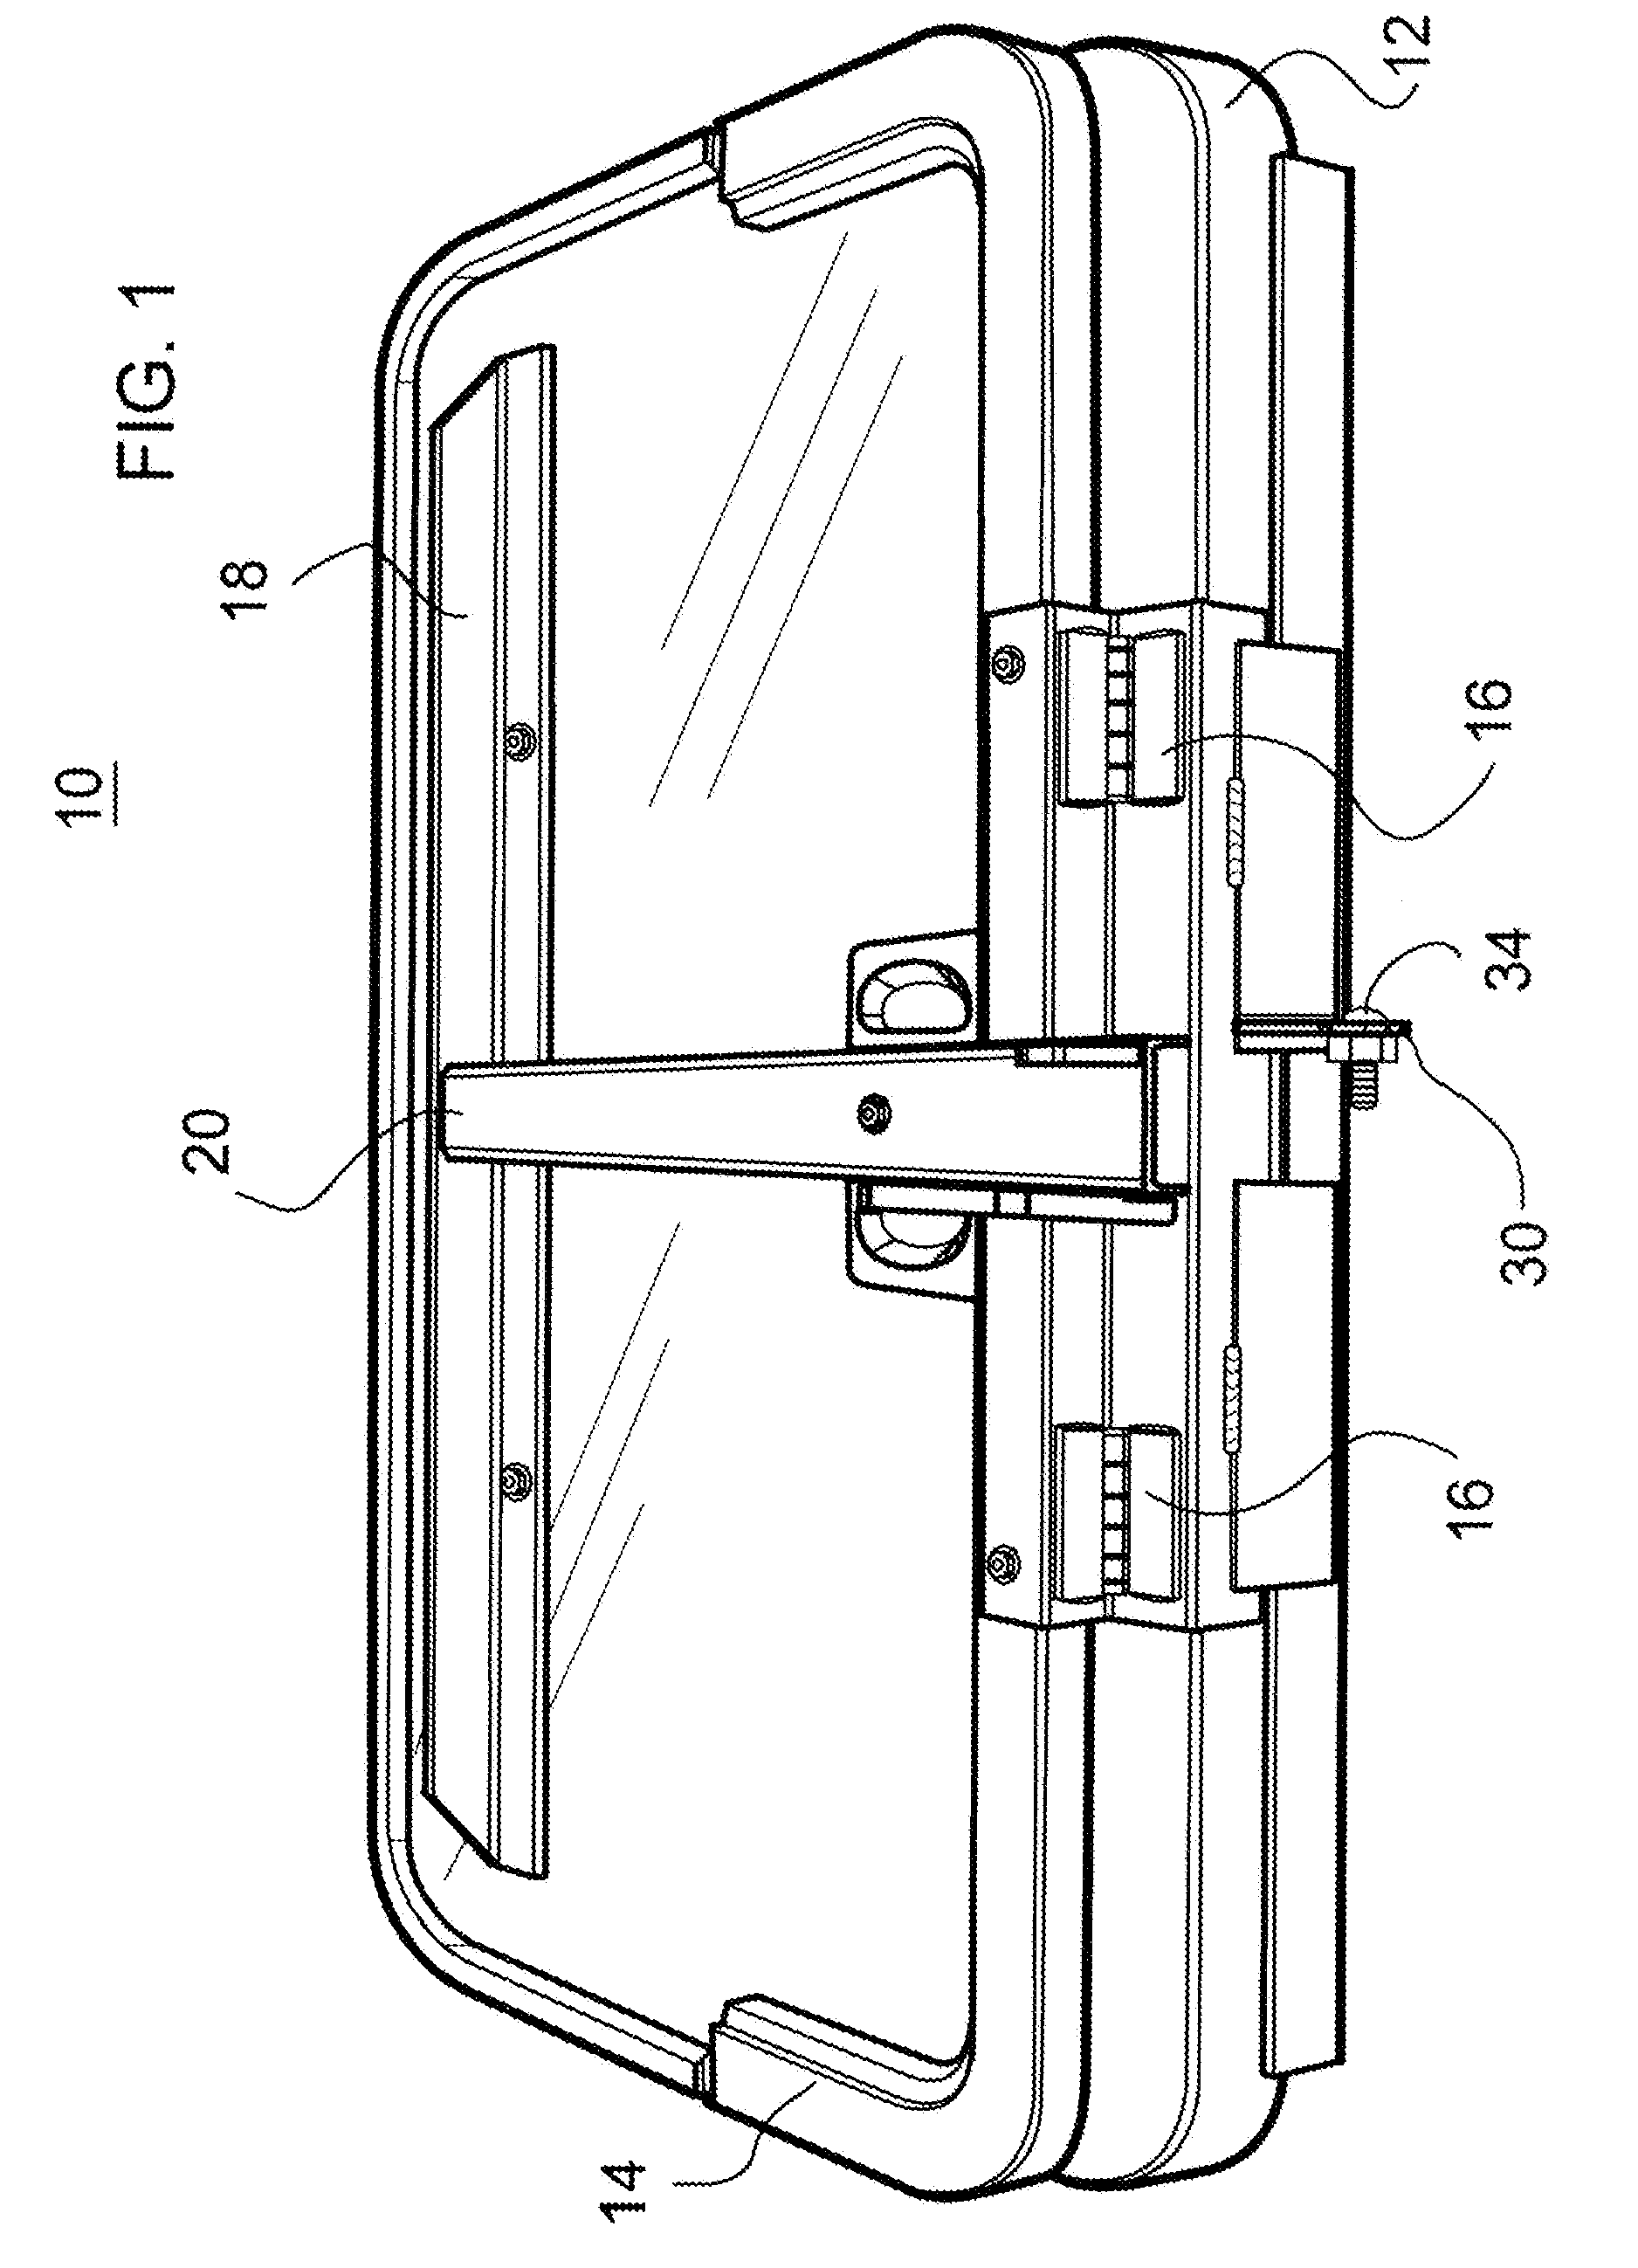 Ball game apparatus and method